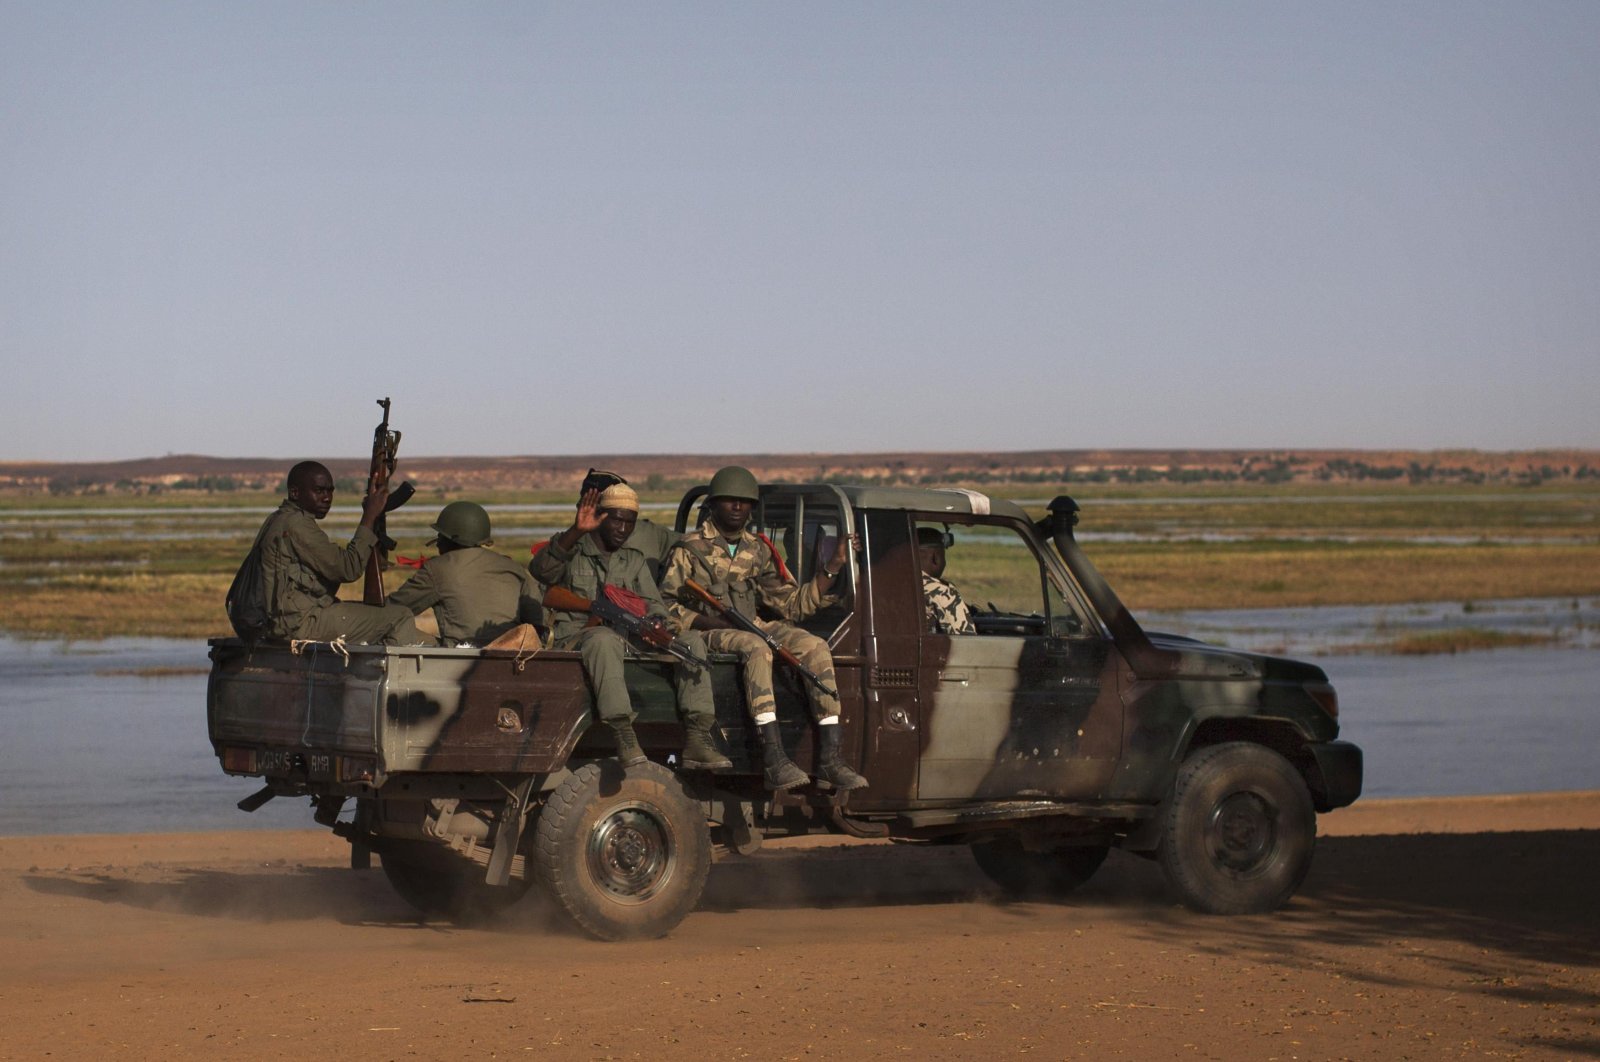 Malian soldiers patrol the banks of the Niger River in a military vehicle in Gao, Mali, Feb. 26, 2013. (Reuters Photo)